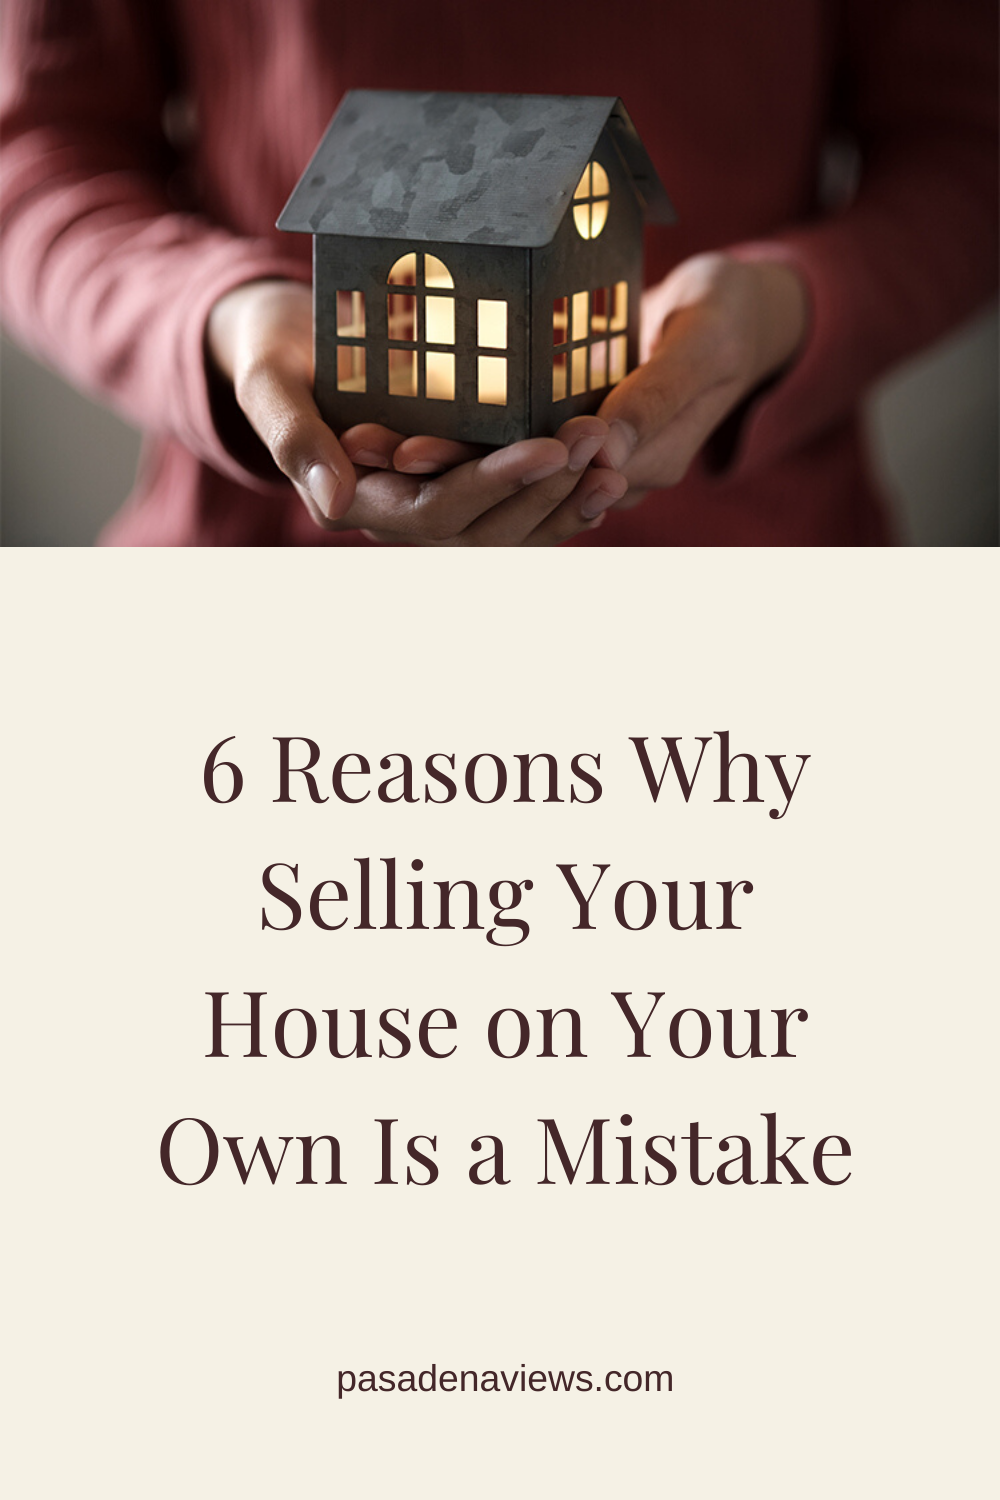 6 Reasons Why Selling Your House on You Own Is a Mistake